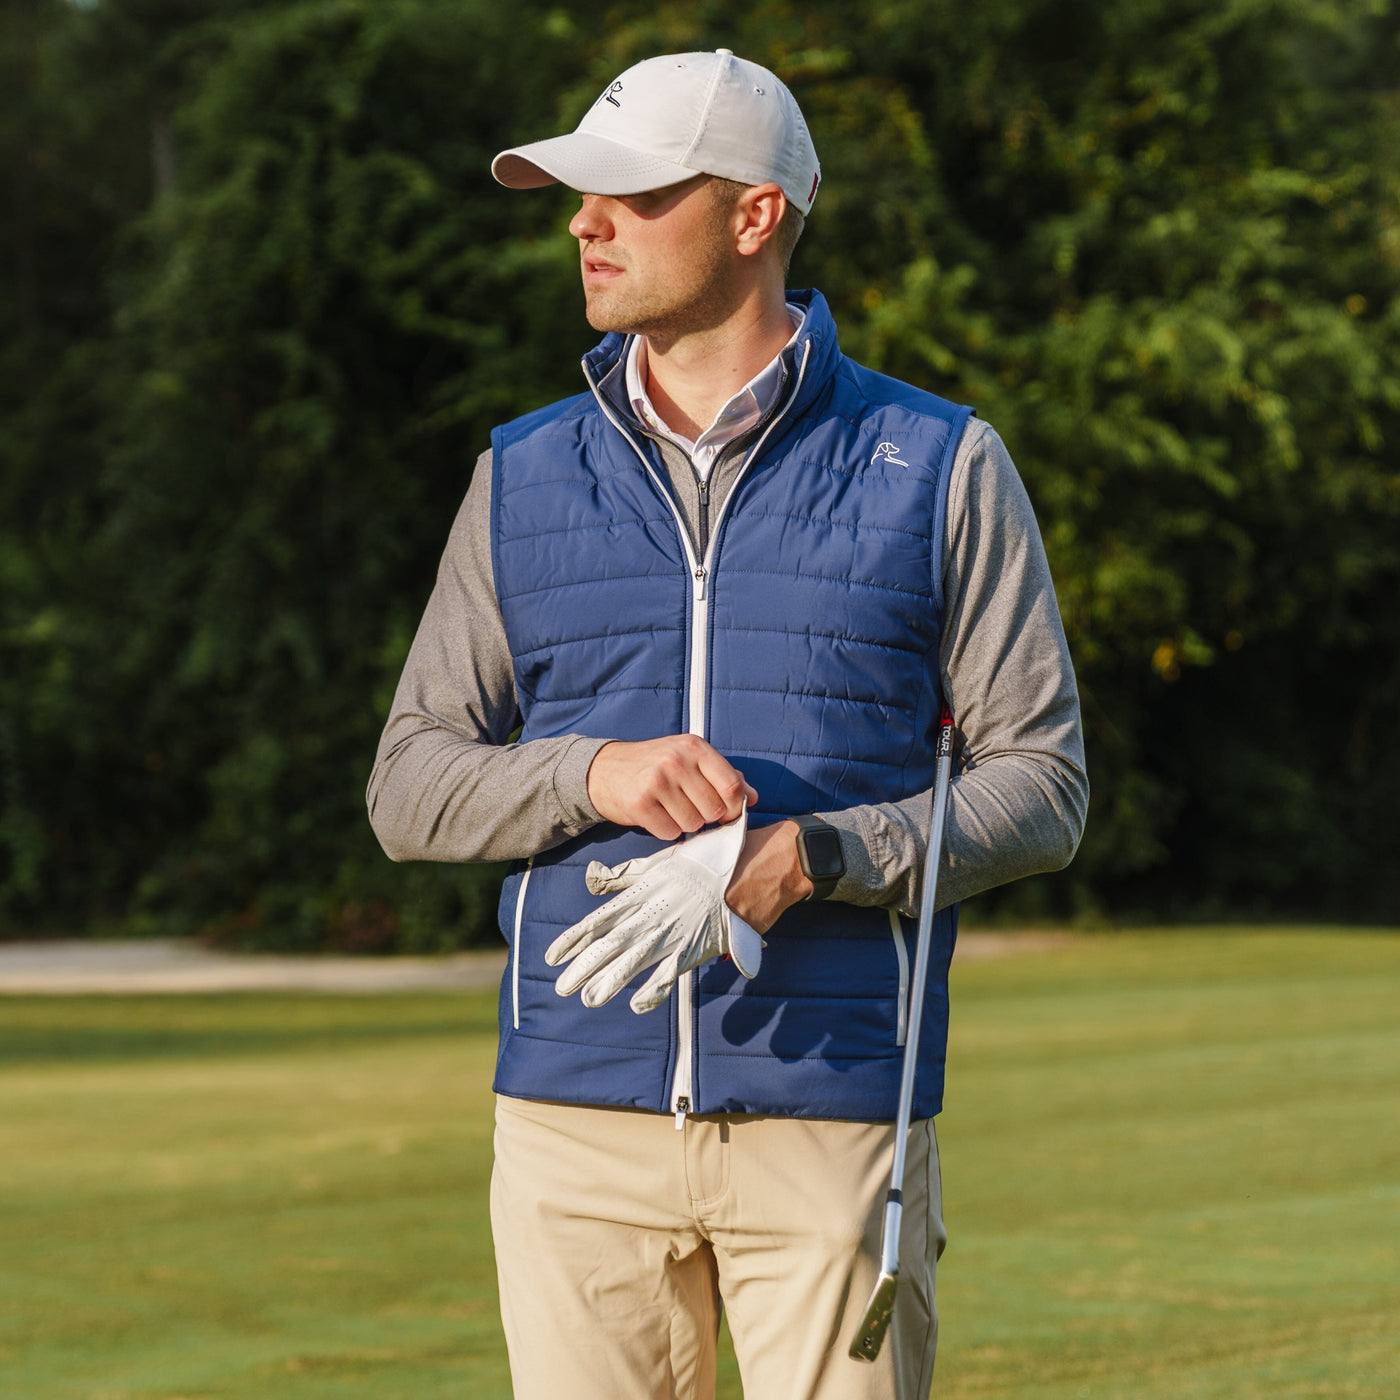 Fulton Performance Vest | Solid - Admiral Navy/White -  USA